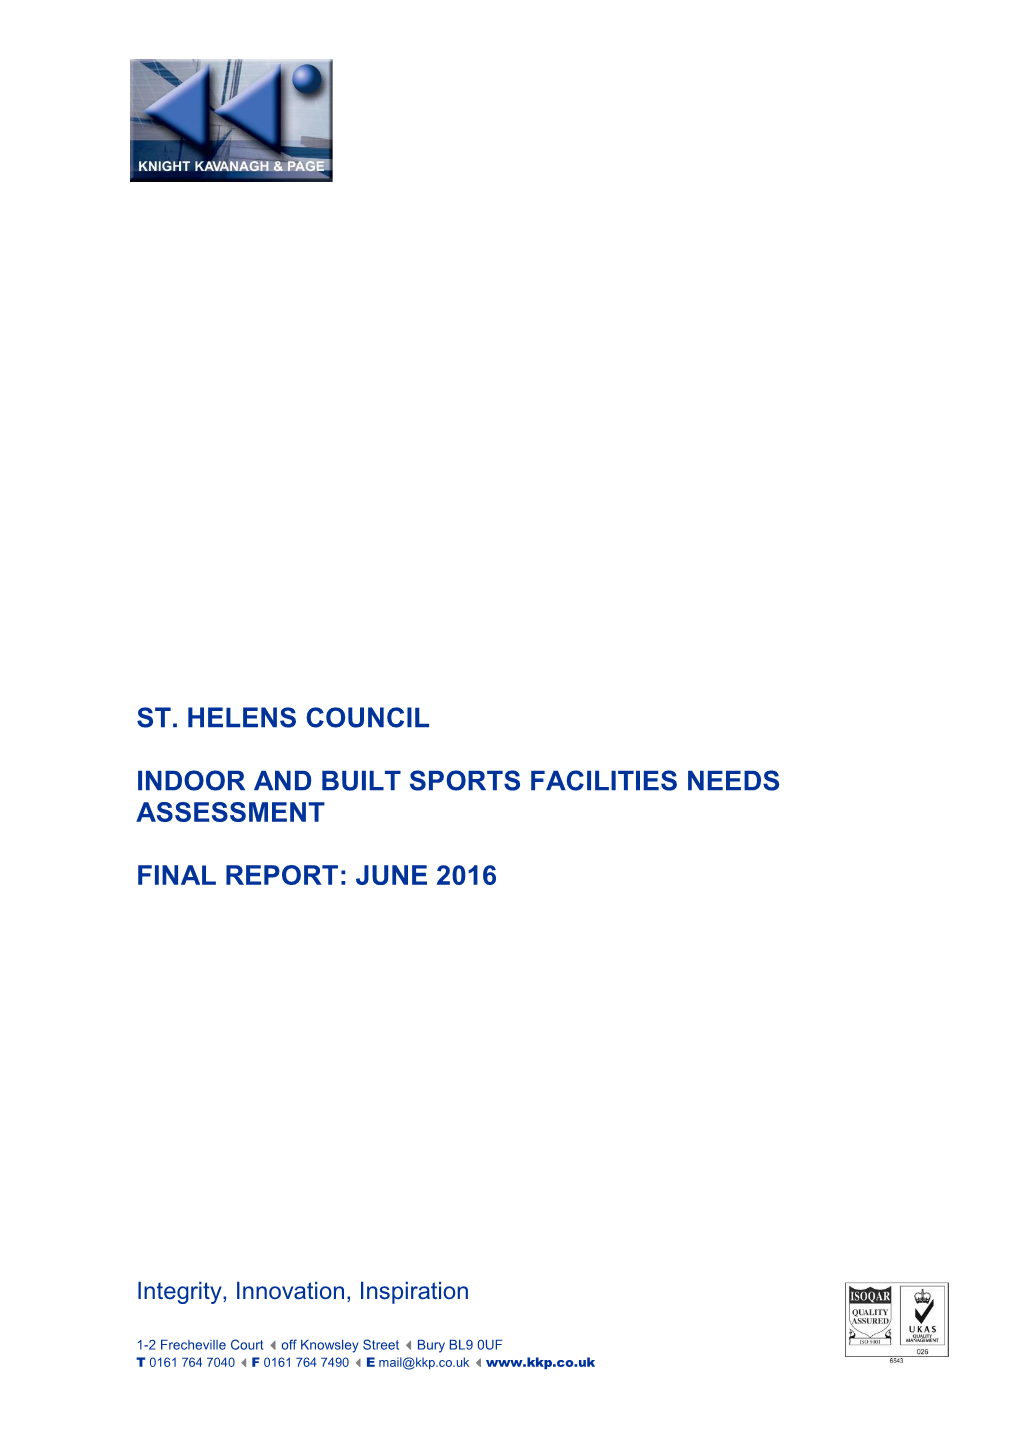 St. Helens Council Indoor and Built Sports Facilities Needs Assessment